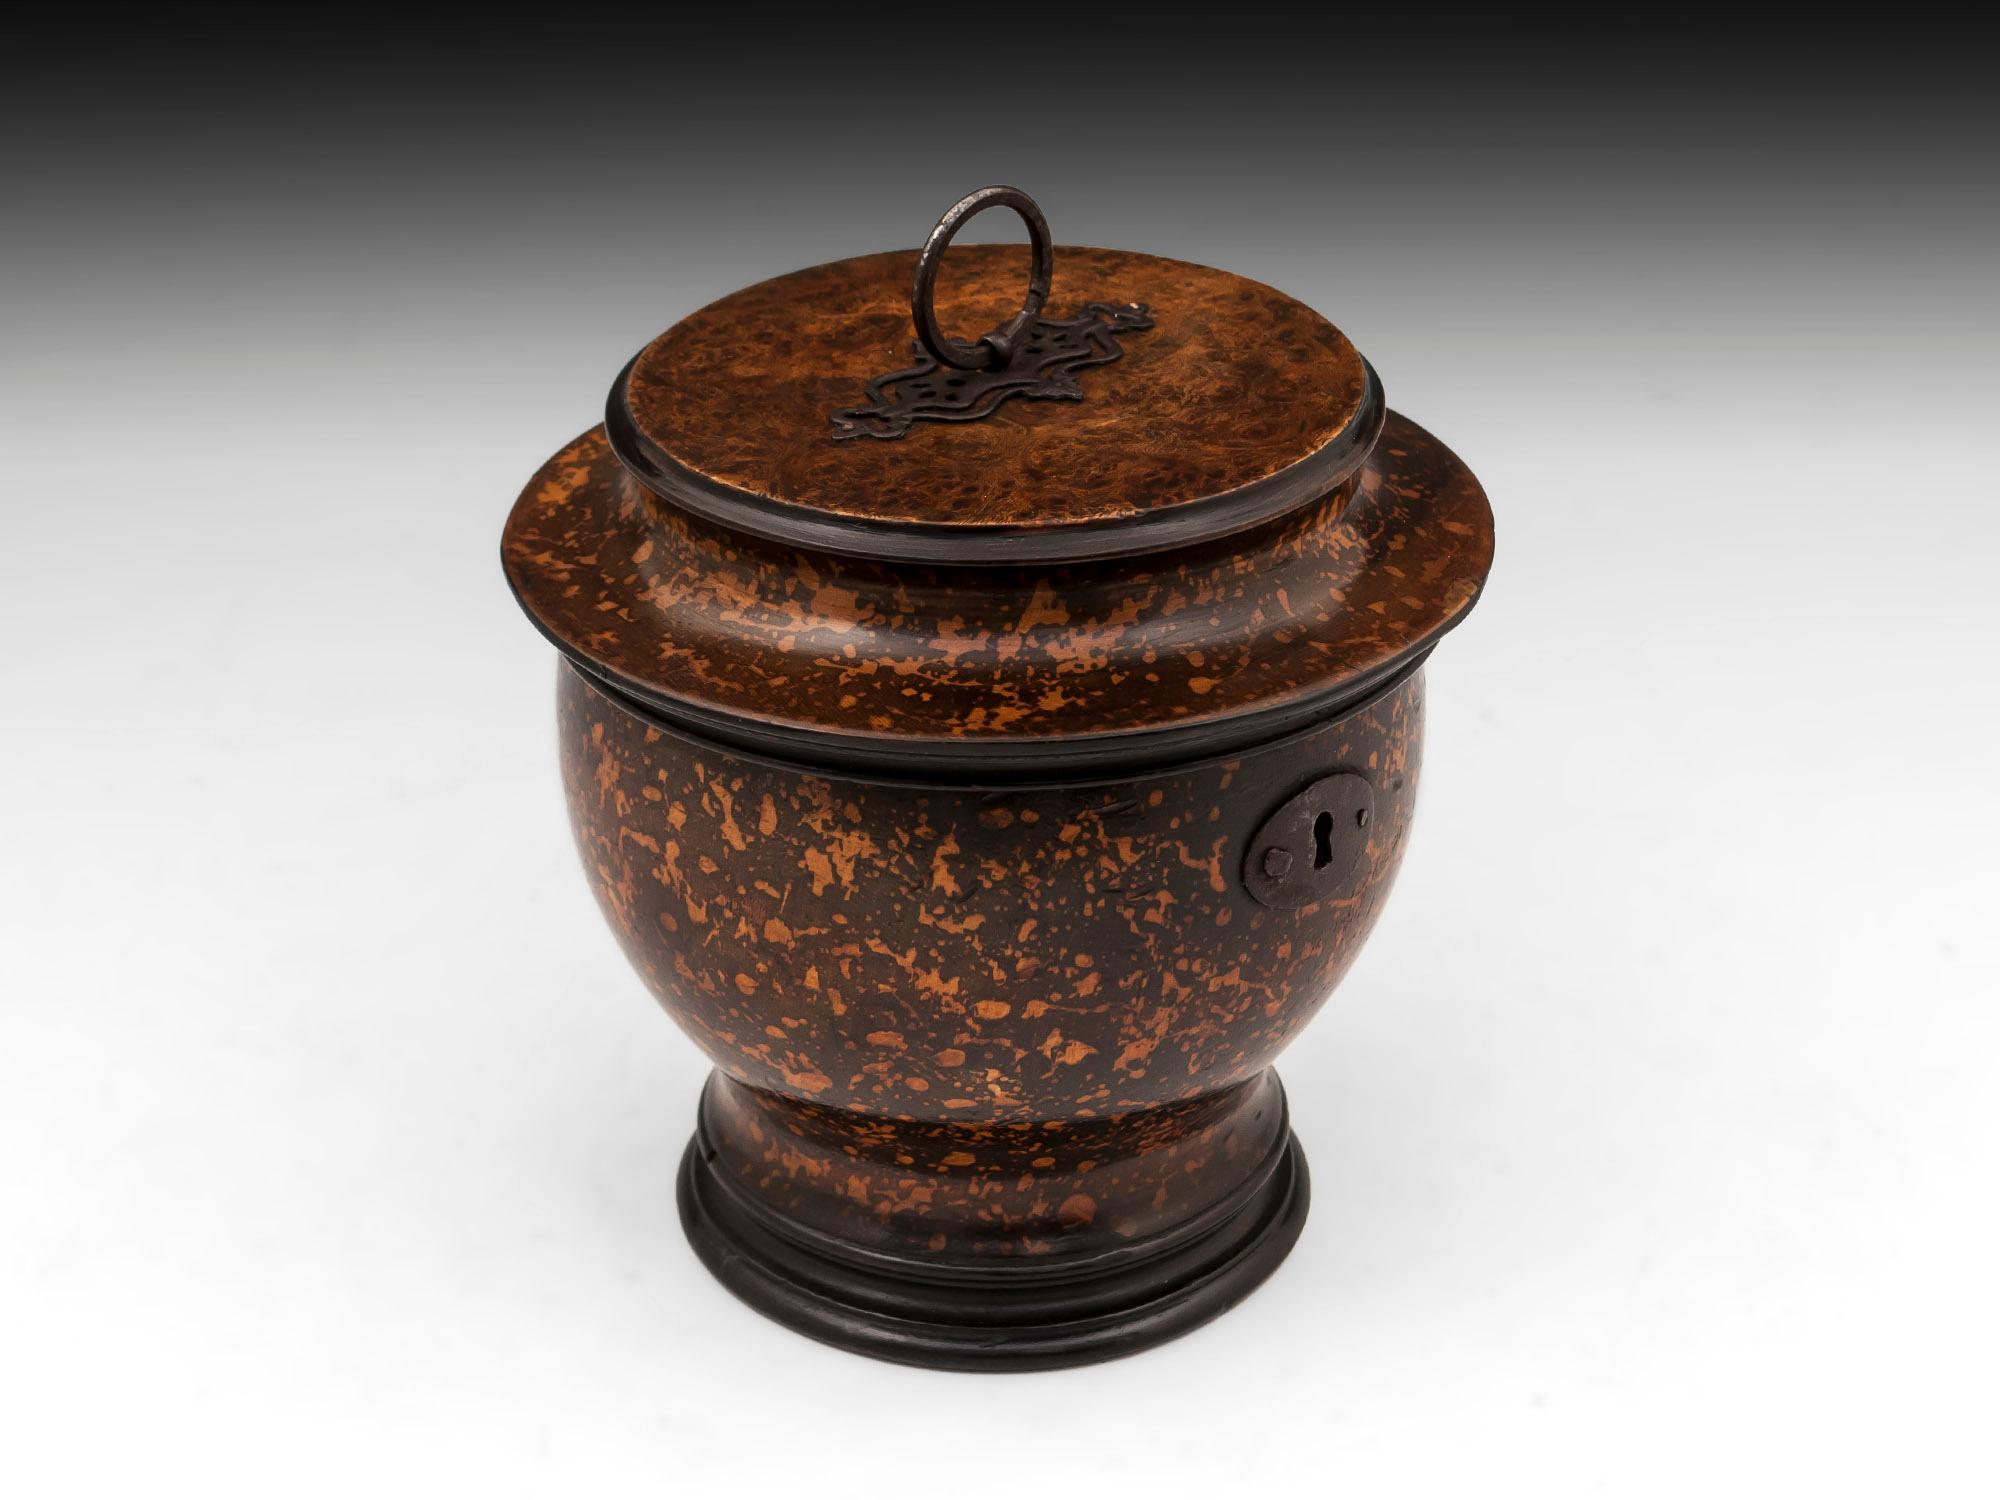 British Antique Urn Shaped Mottled Tea Caddy Early 19th Century